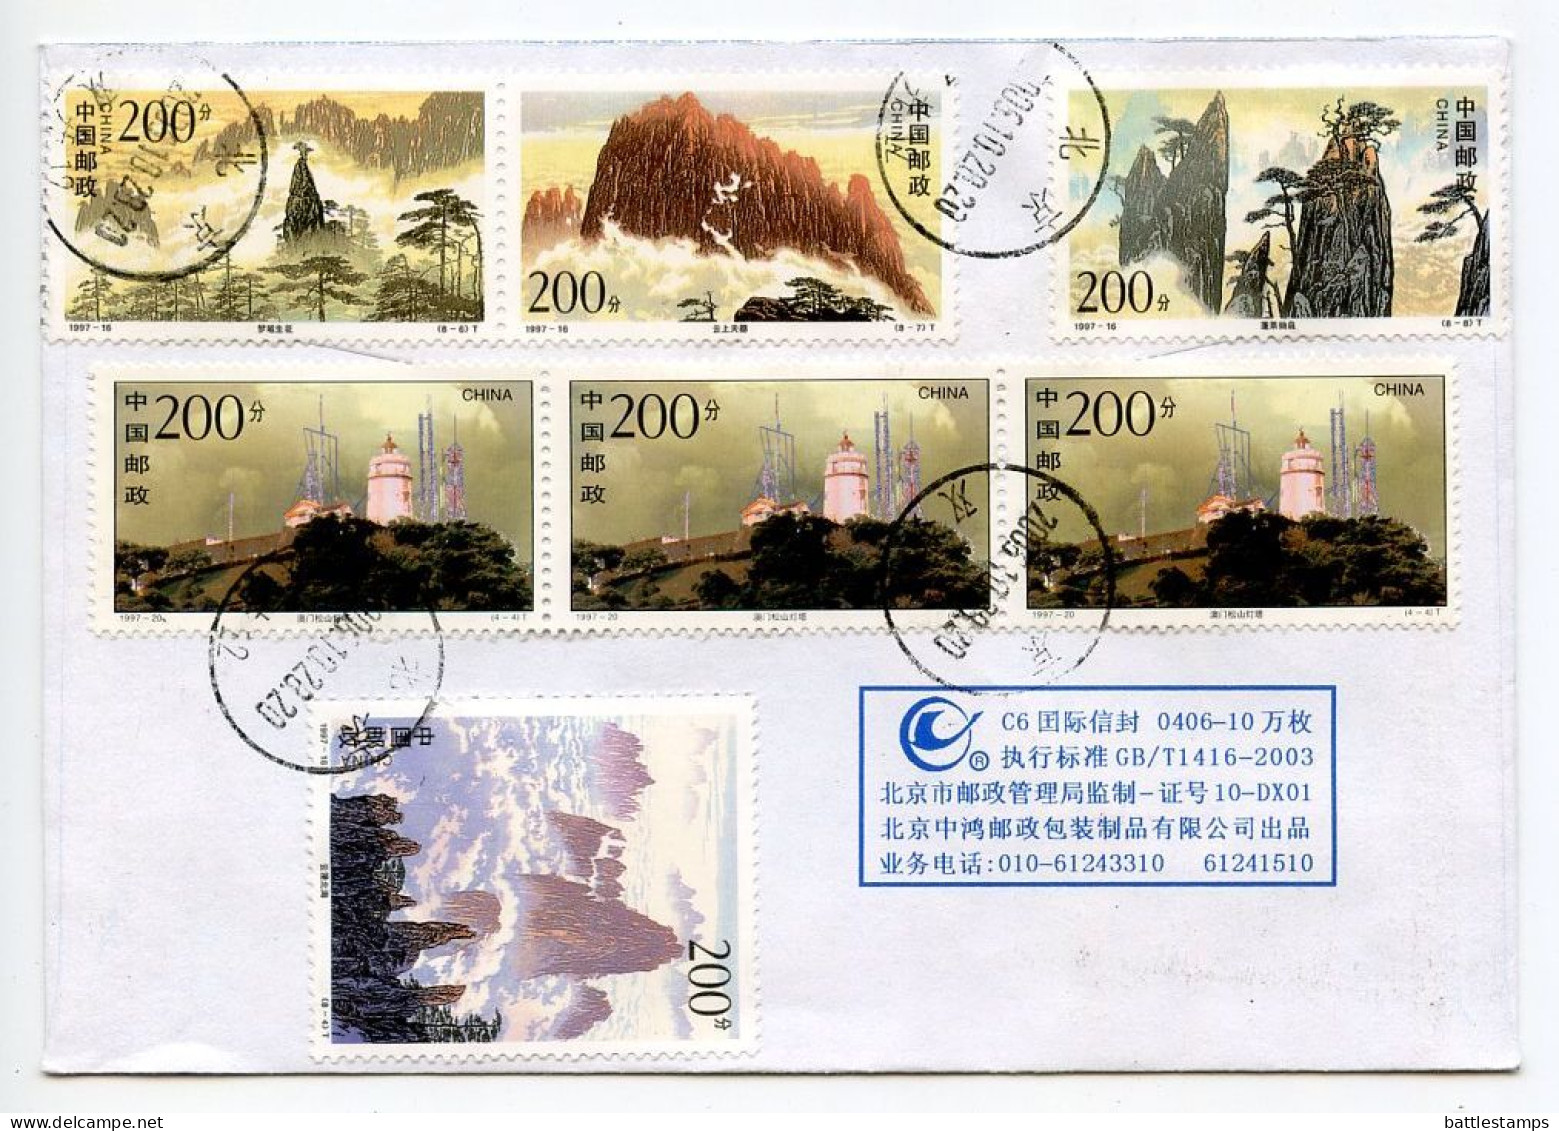 China, PRC 2006 Registered Airmail Cover - Bejing To Hartford, Vermont; Scott 2805d & F-h, And 2815 X 3 - Lettres & Documents